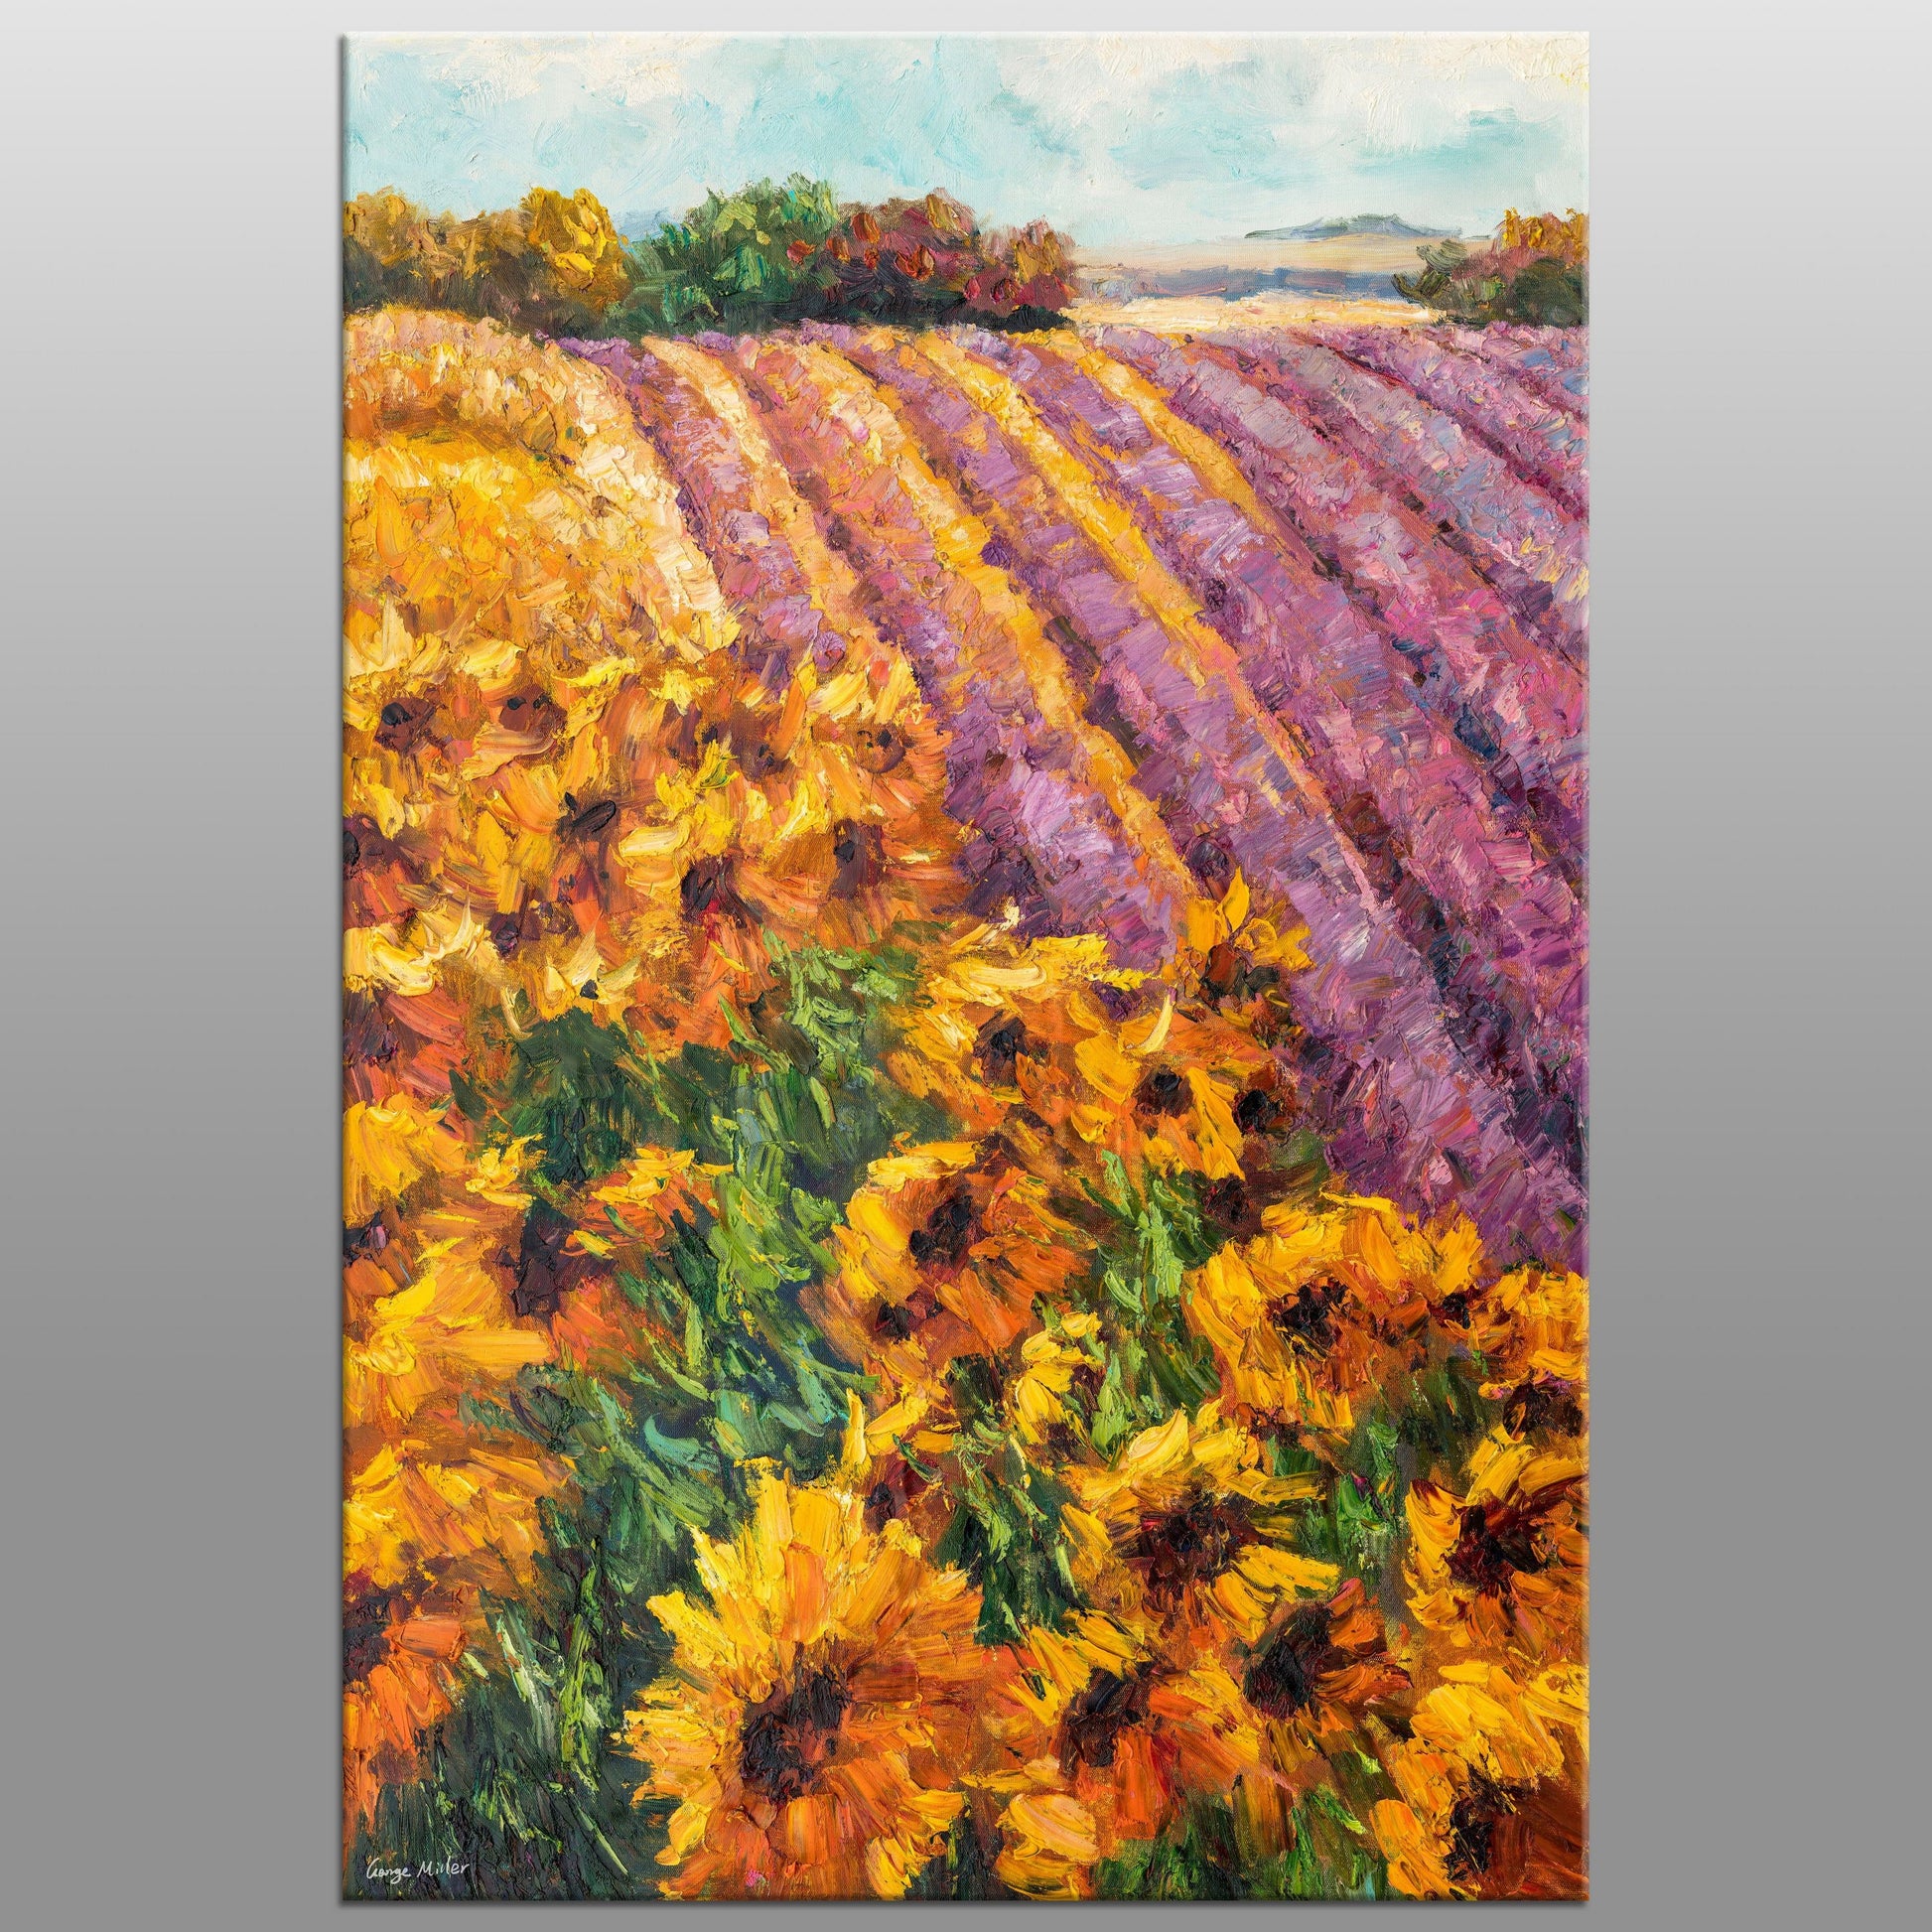 Original Large Oil Painting Sunflower Fields Tuscany - Contemporary Canvas Wall Art - Ready to Hang - Landscape